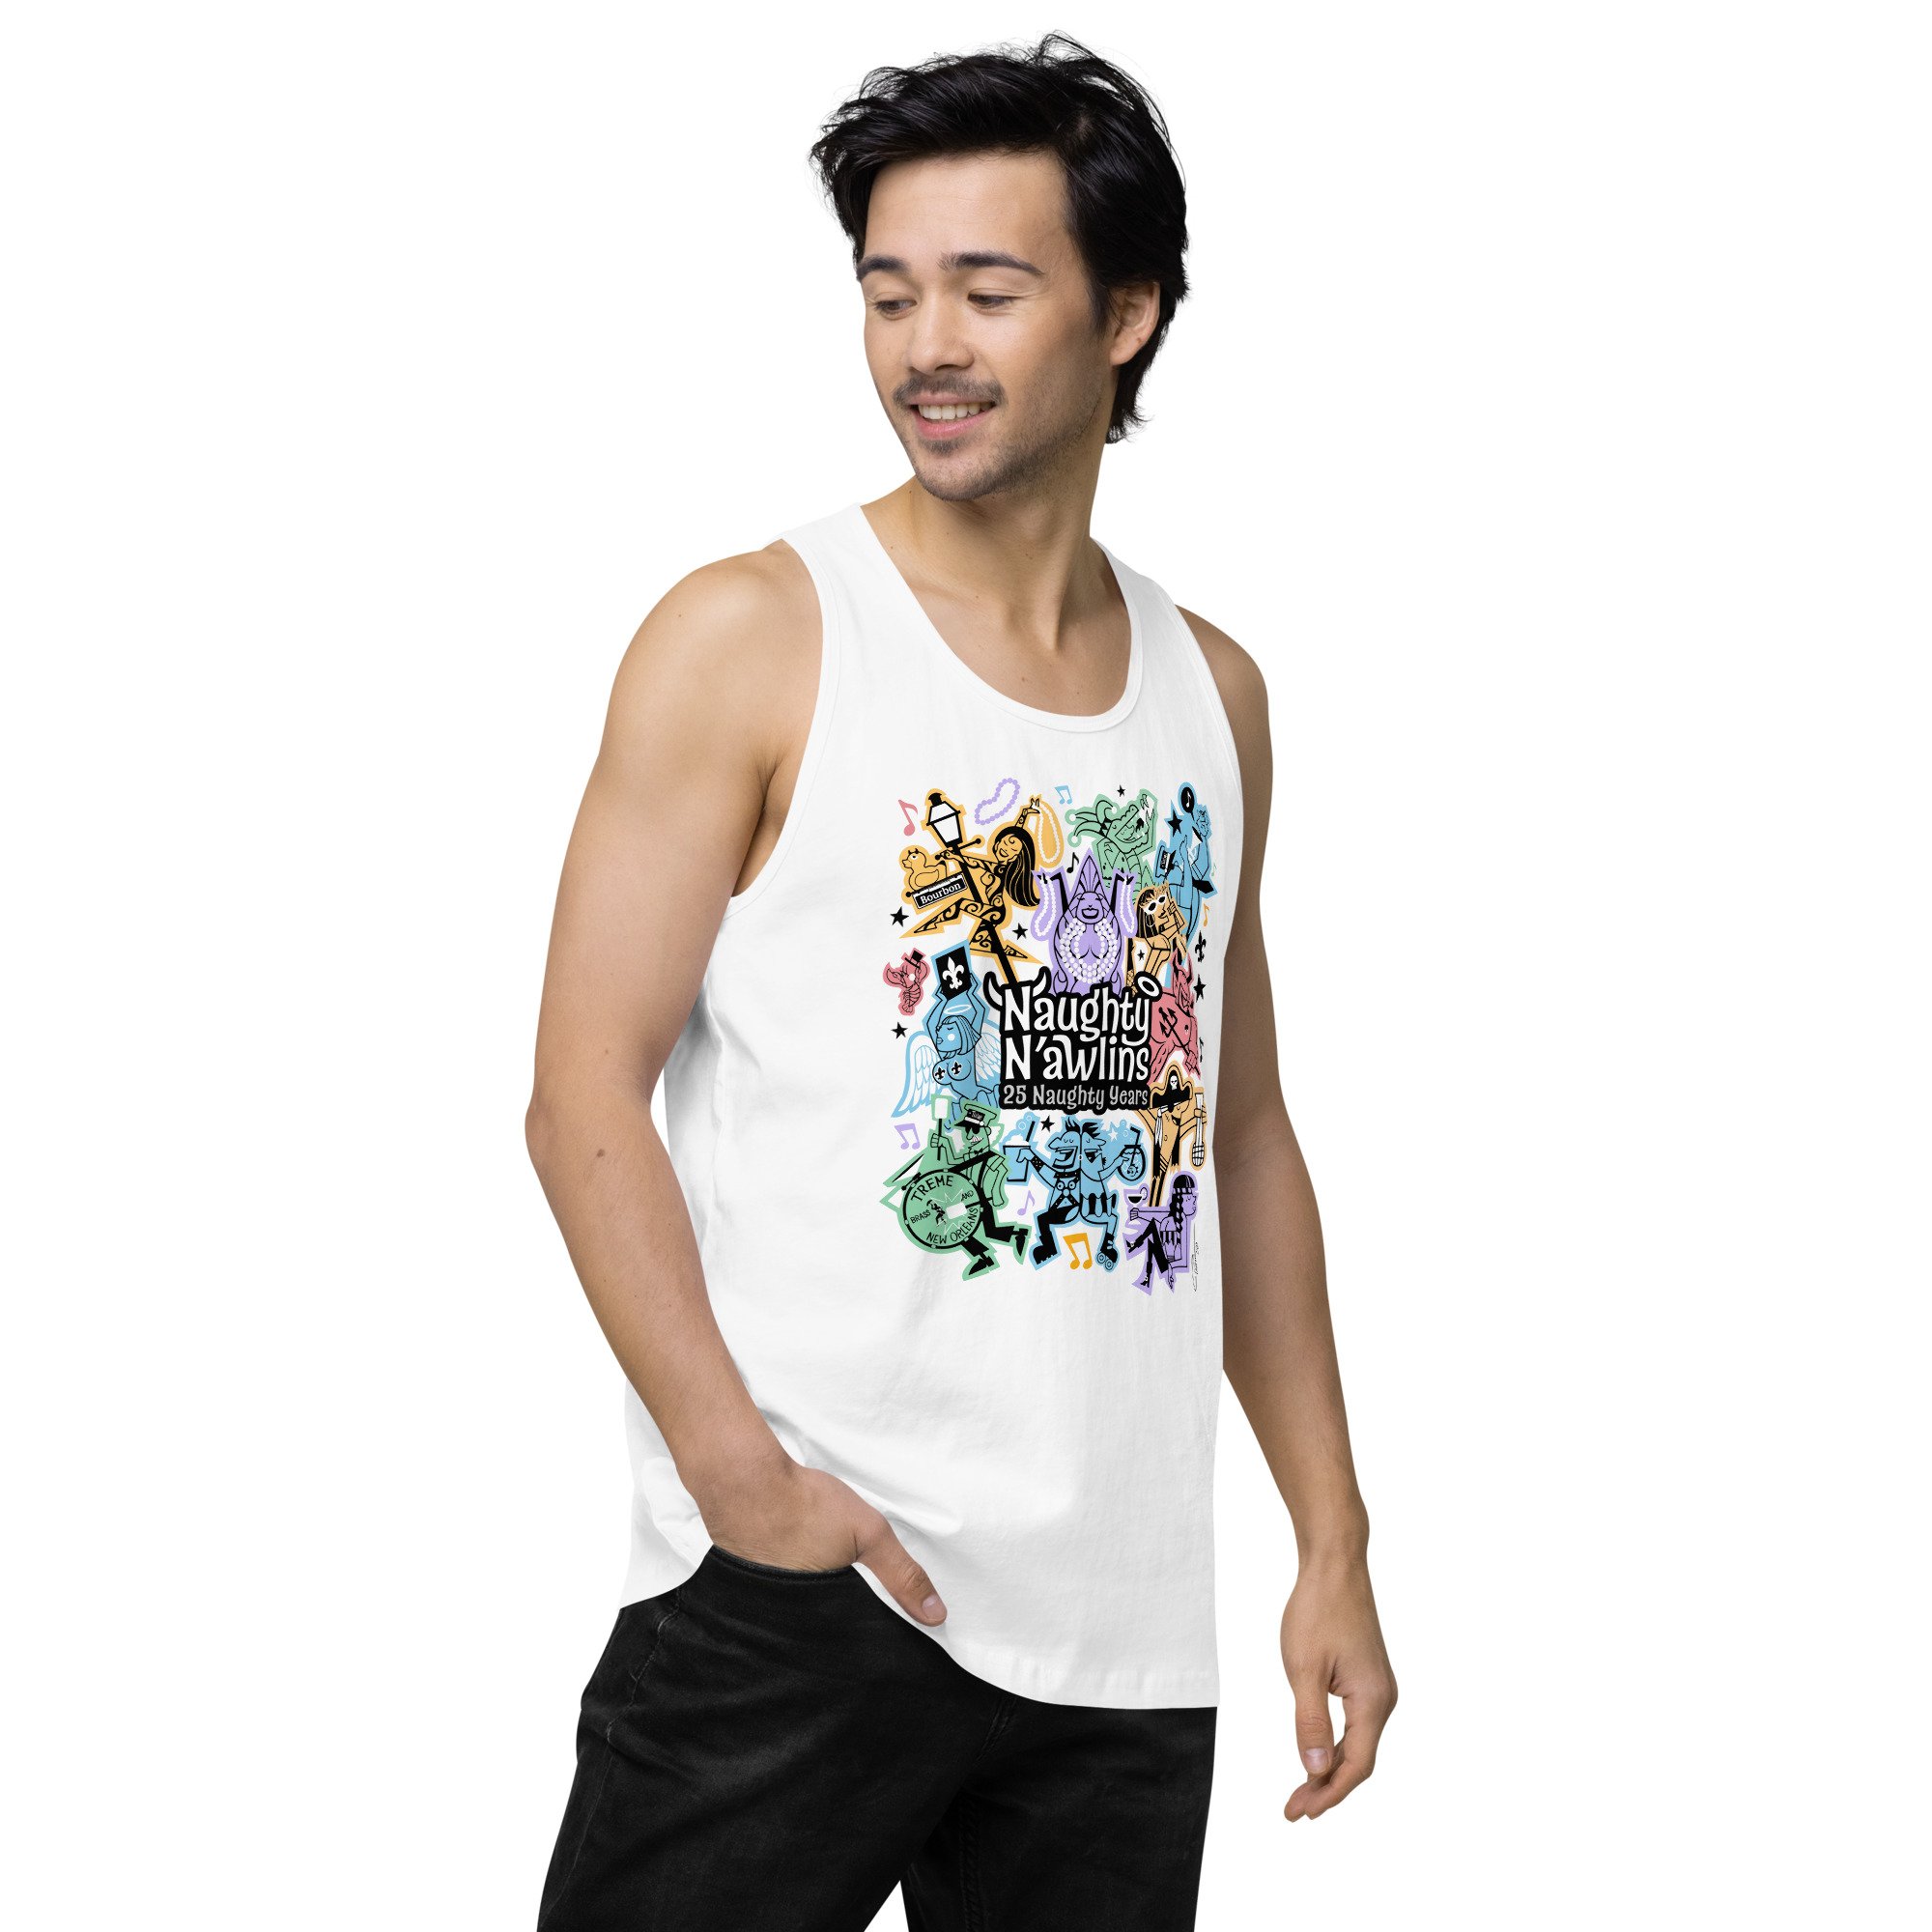 Naughty N'awlins 25 Years Men's premium tank top — NAUGHTY EVENTS